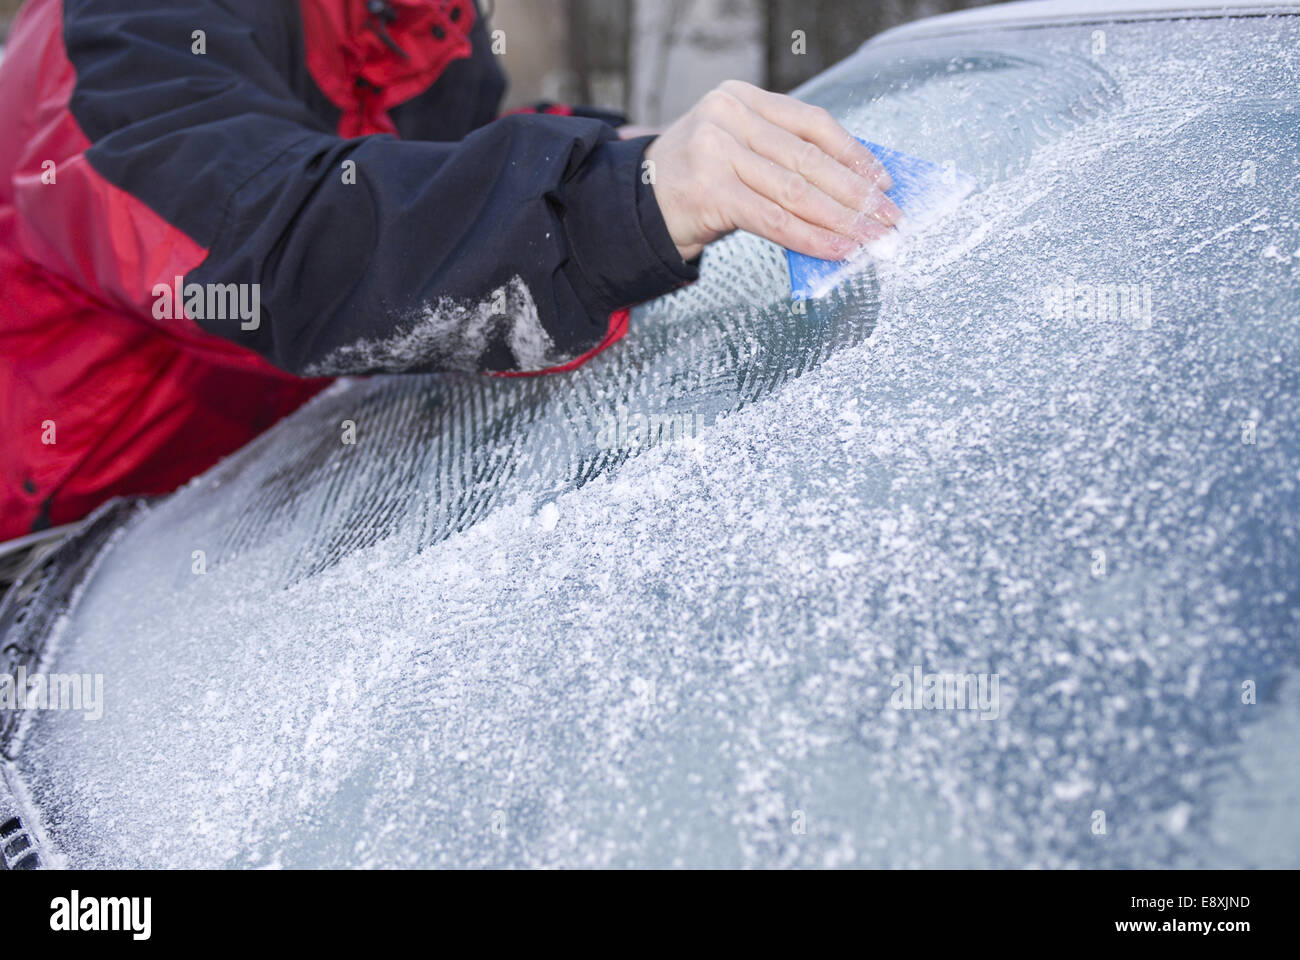 Scraping ice from the windshield Stock Photo